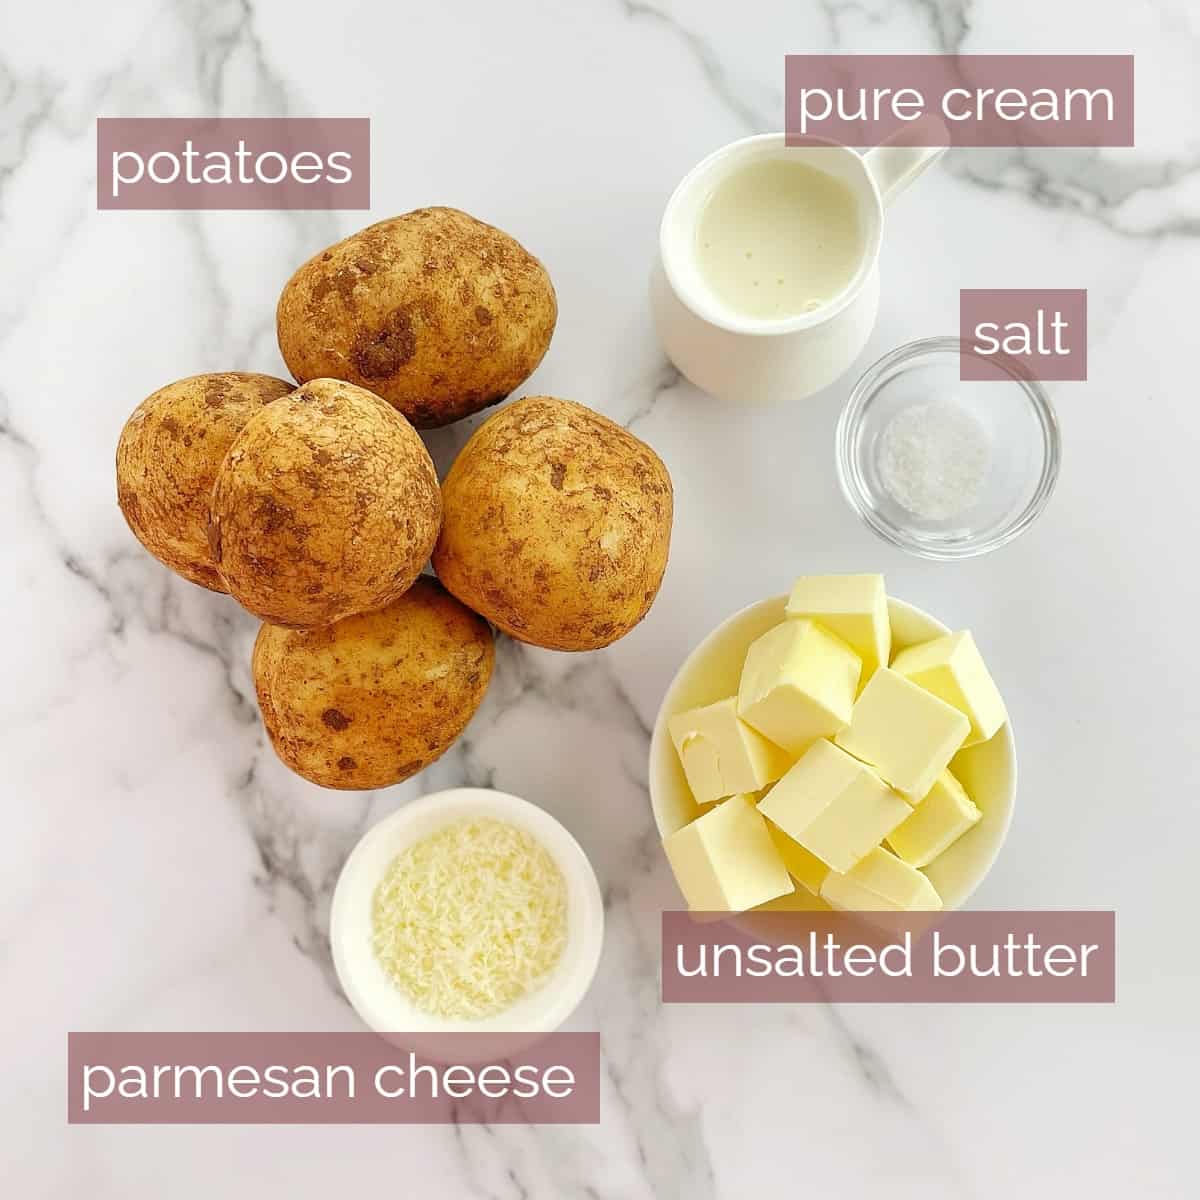 graphic showing ingredients needed to make this recipe along with labels